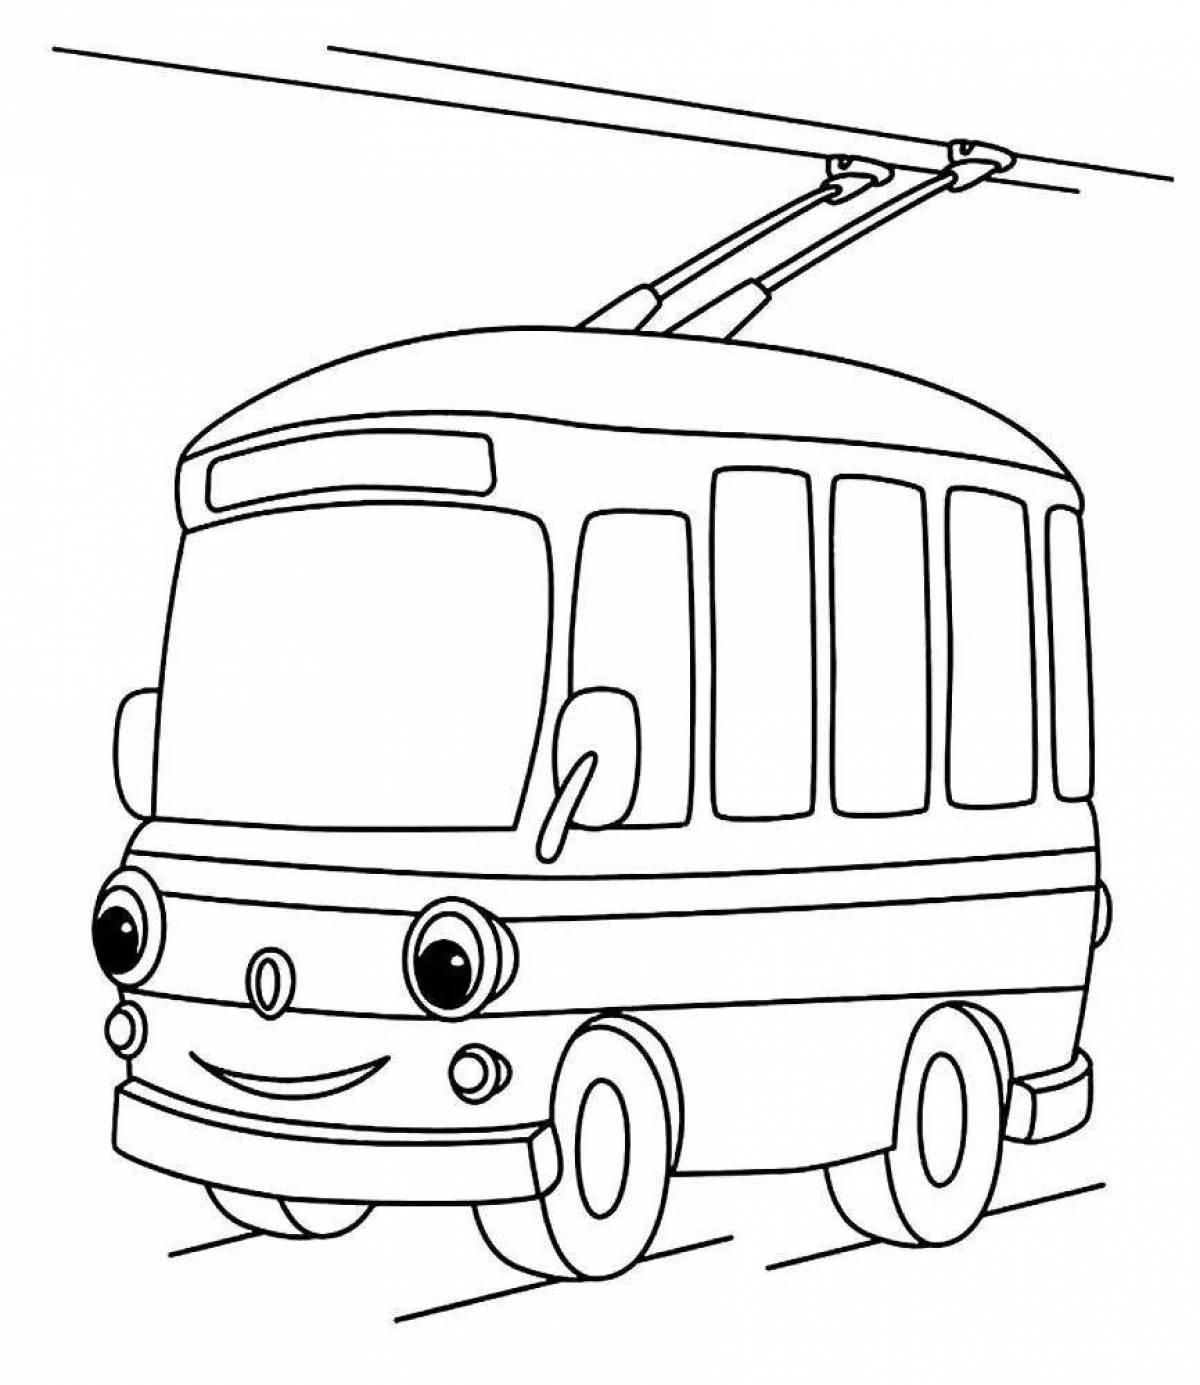 Incredible transport coloring book for the little ones